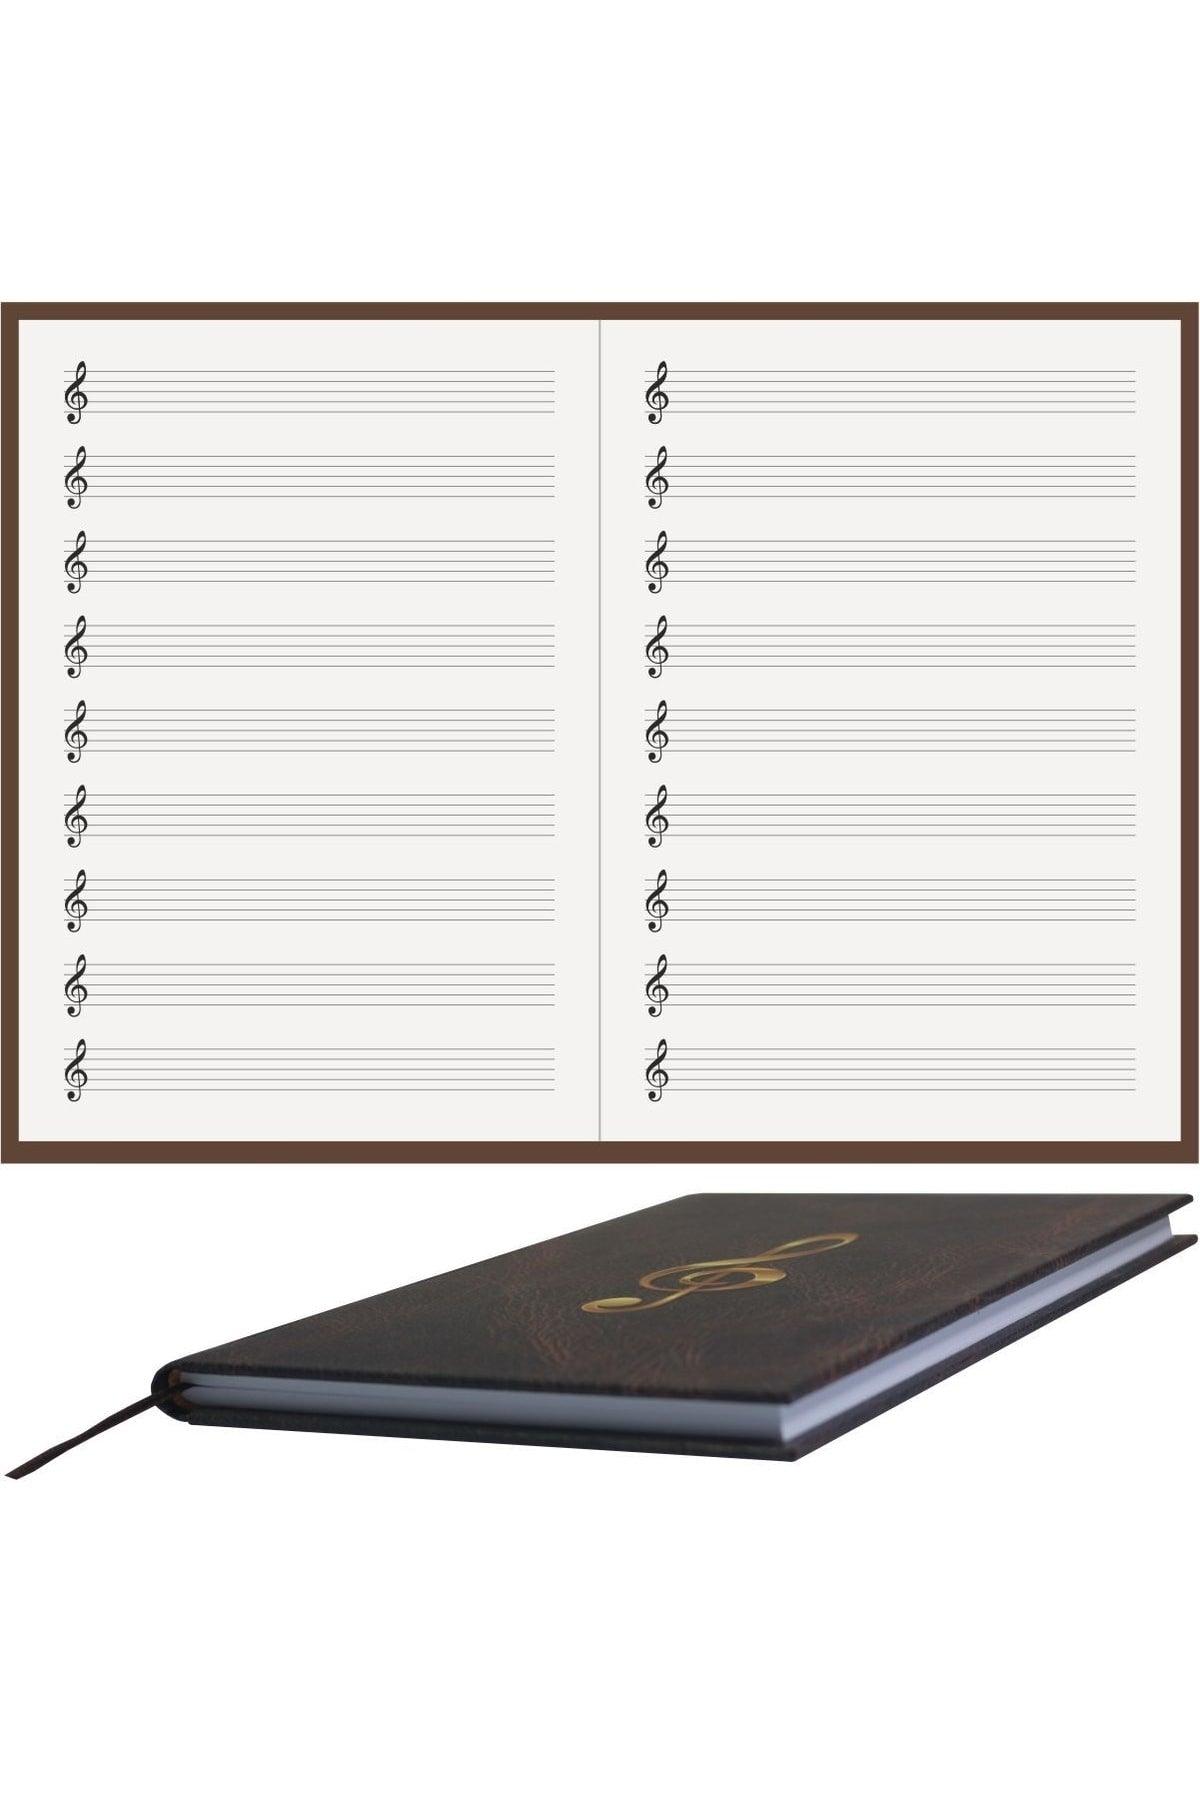 Music Notebook (with Left Key) - Special Hand